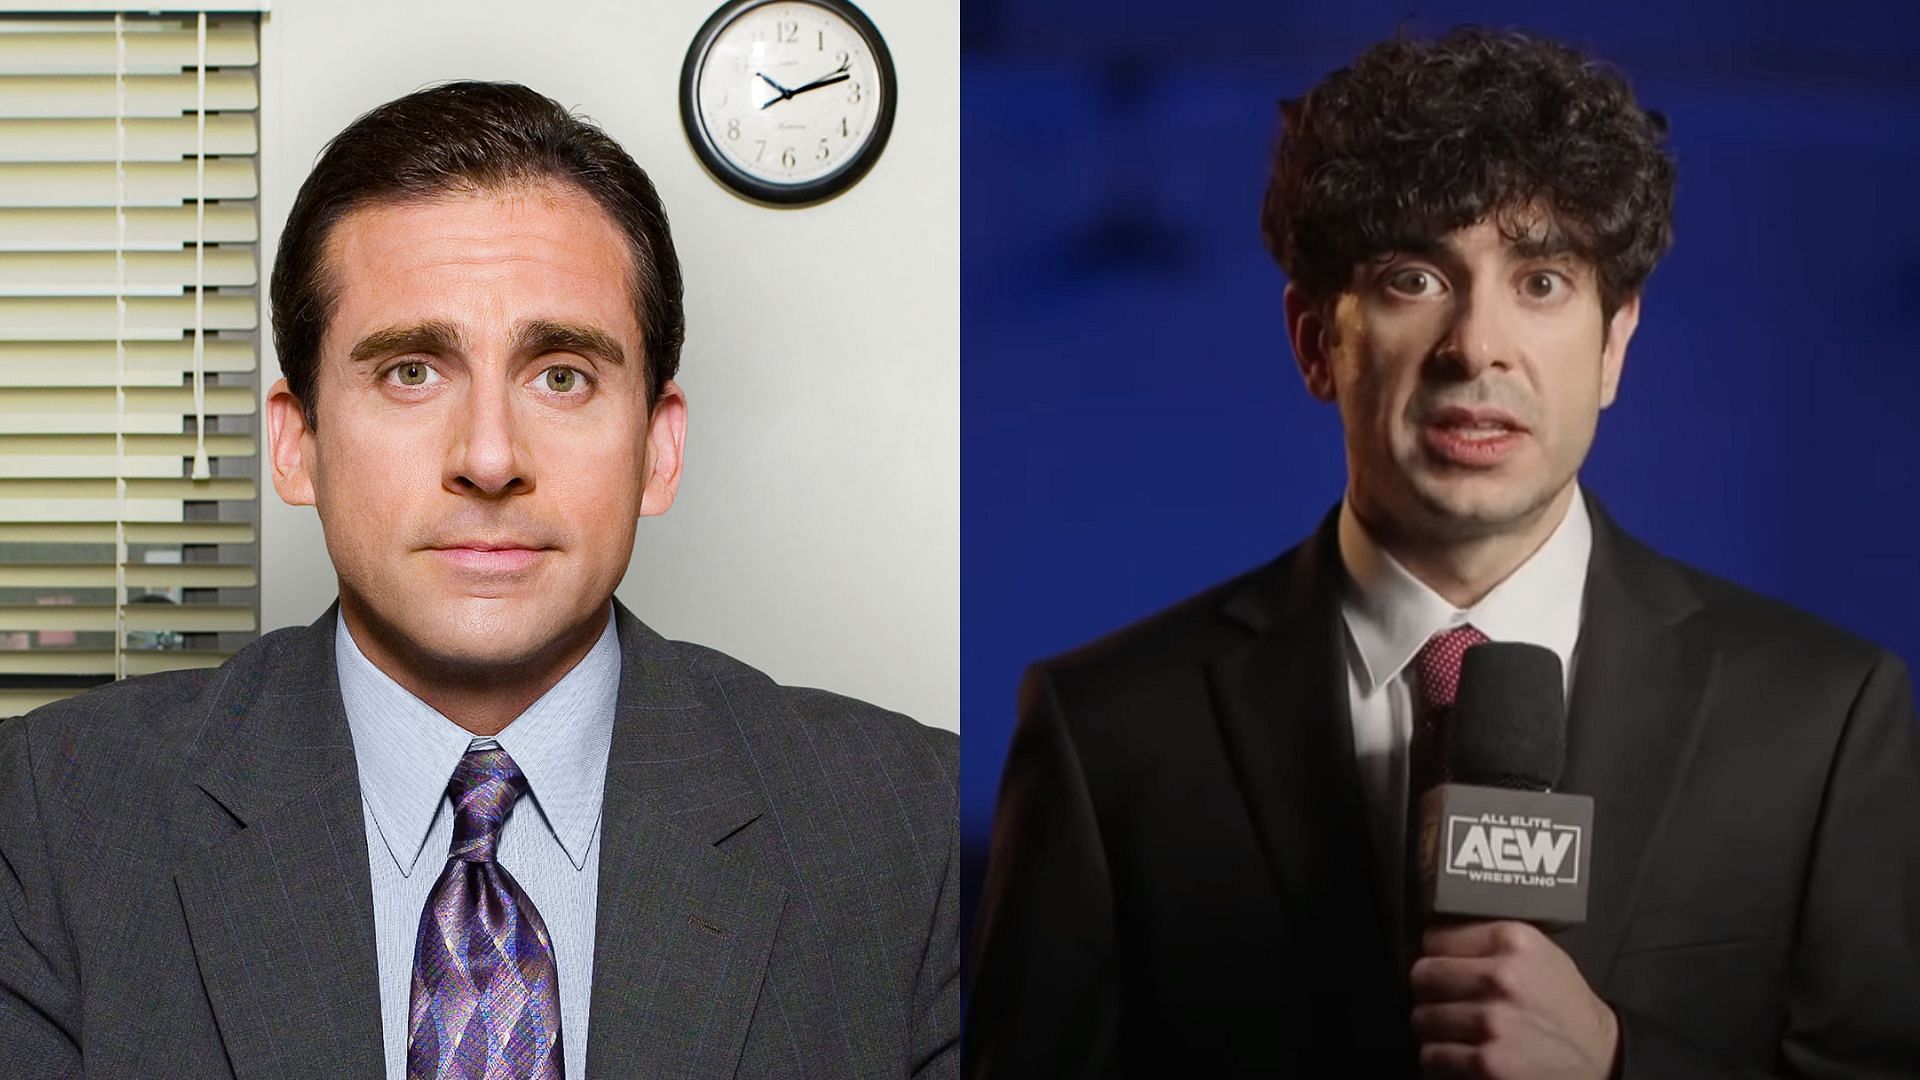 Michael Scott from The Office (left), and AEW President Tony Khan (right) 